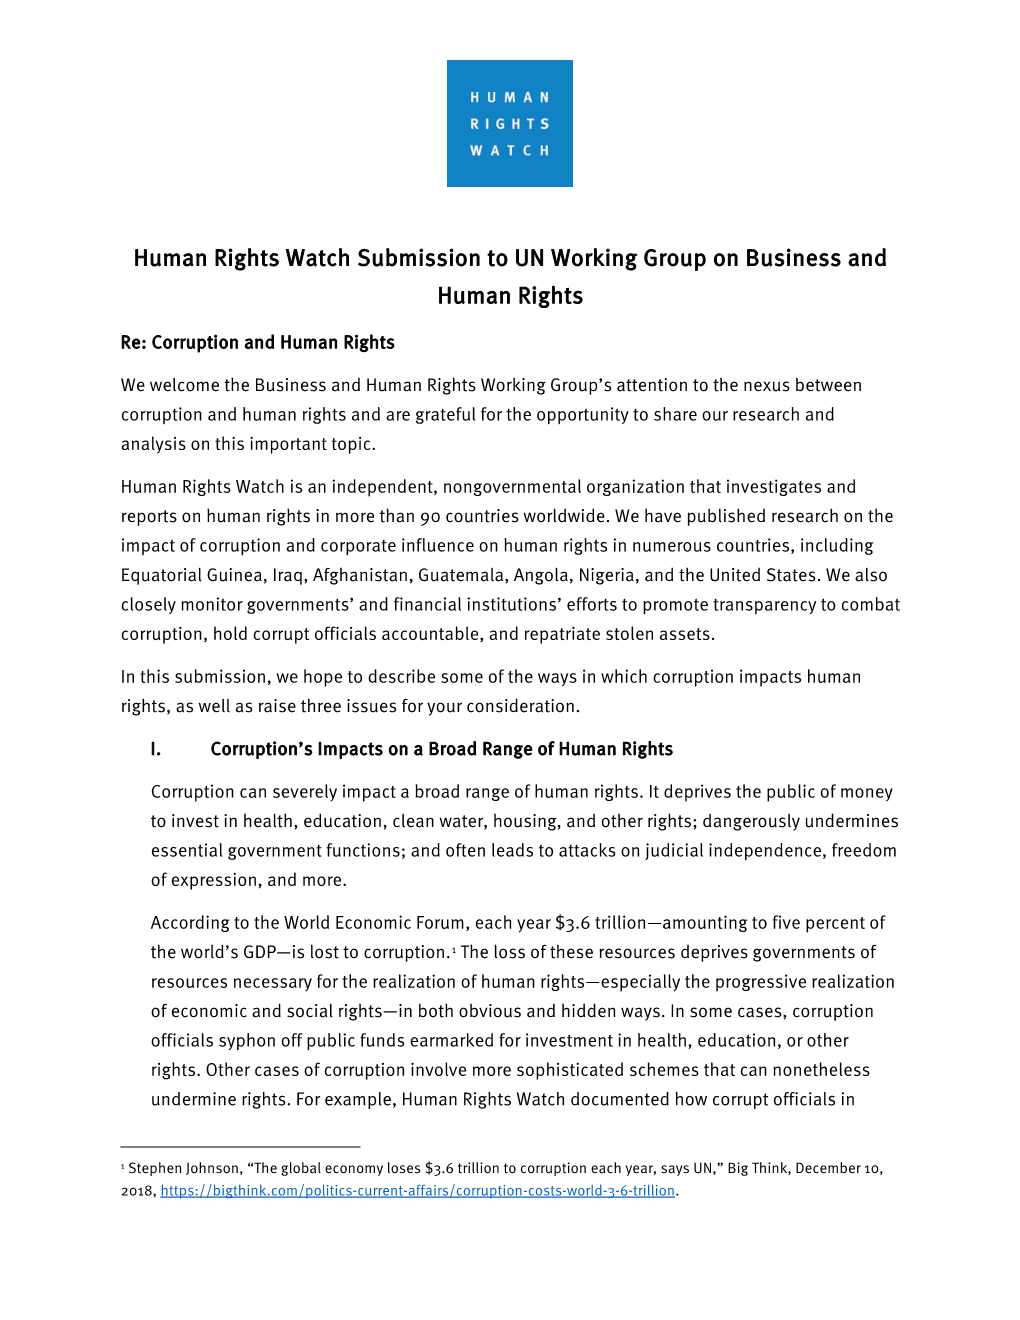 Human Rights Watch Submission to UN Working Group on Business and Human Rights